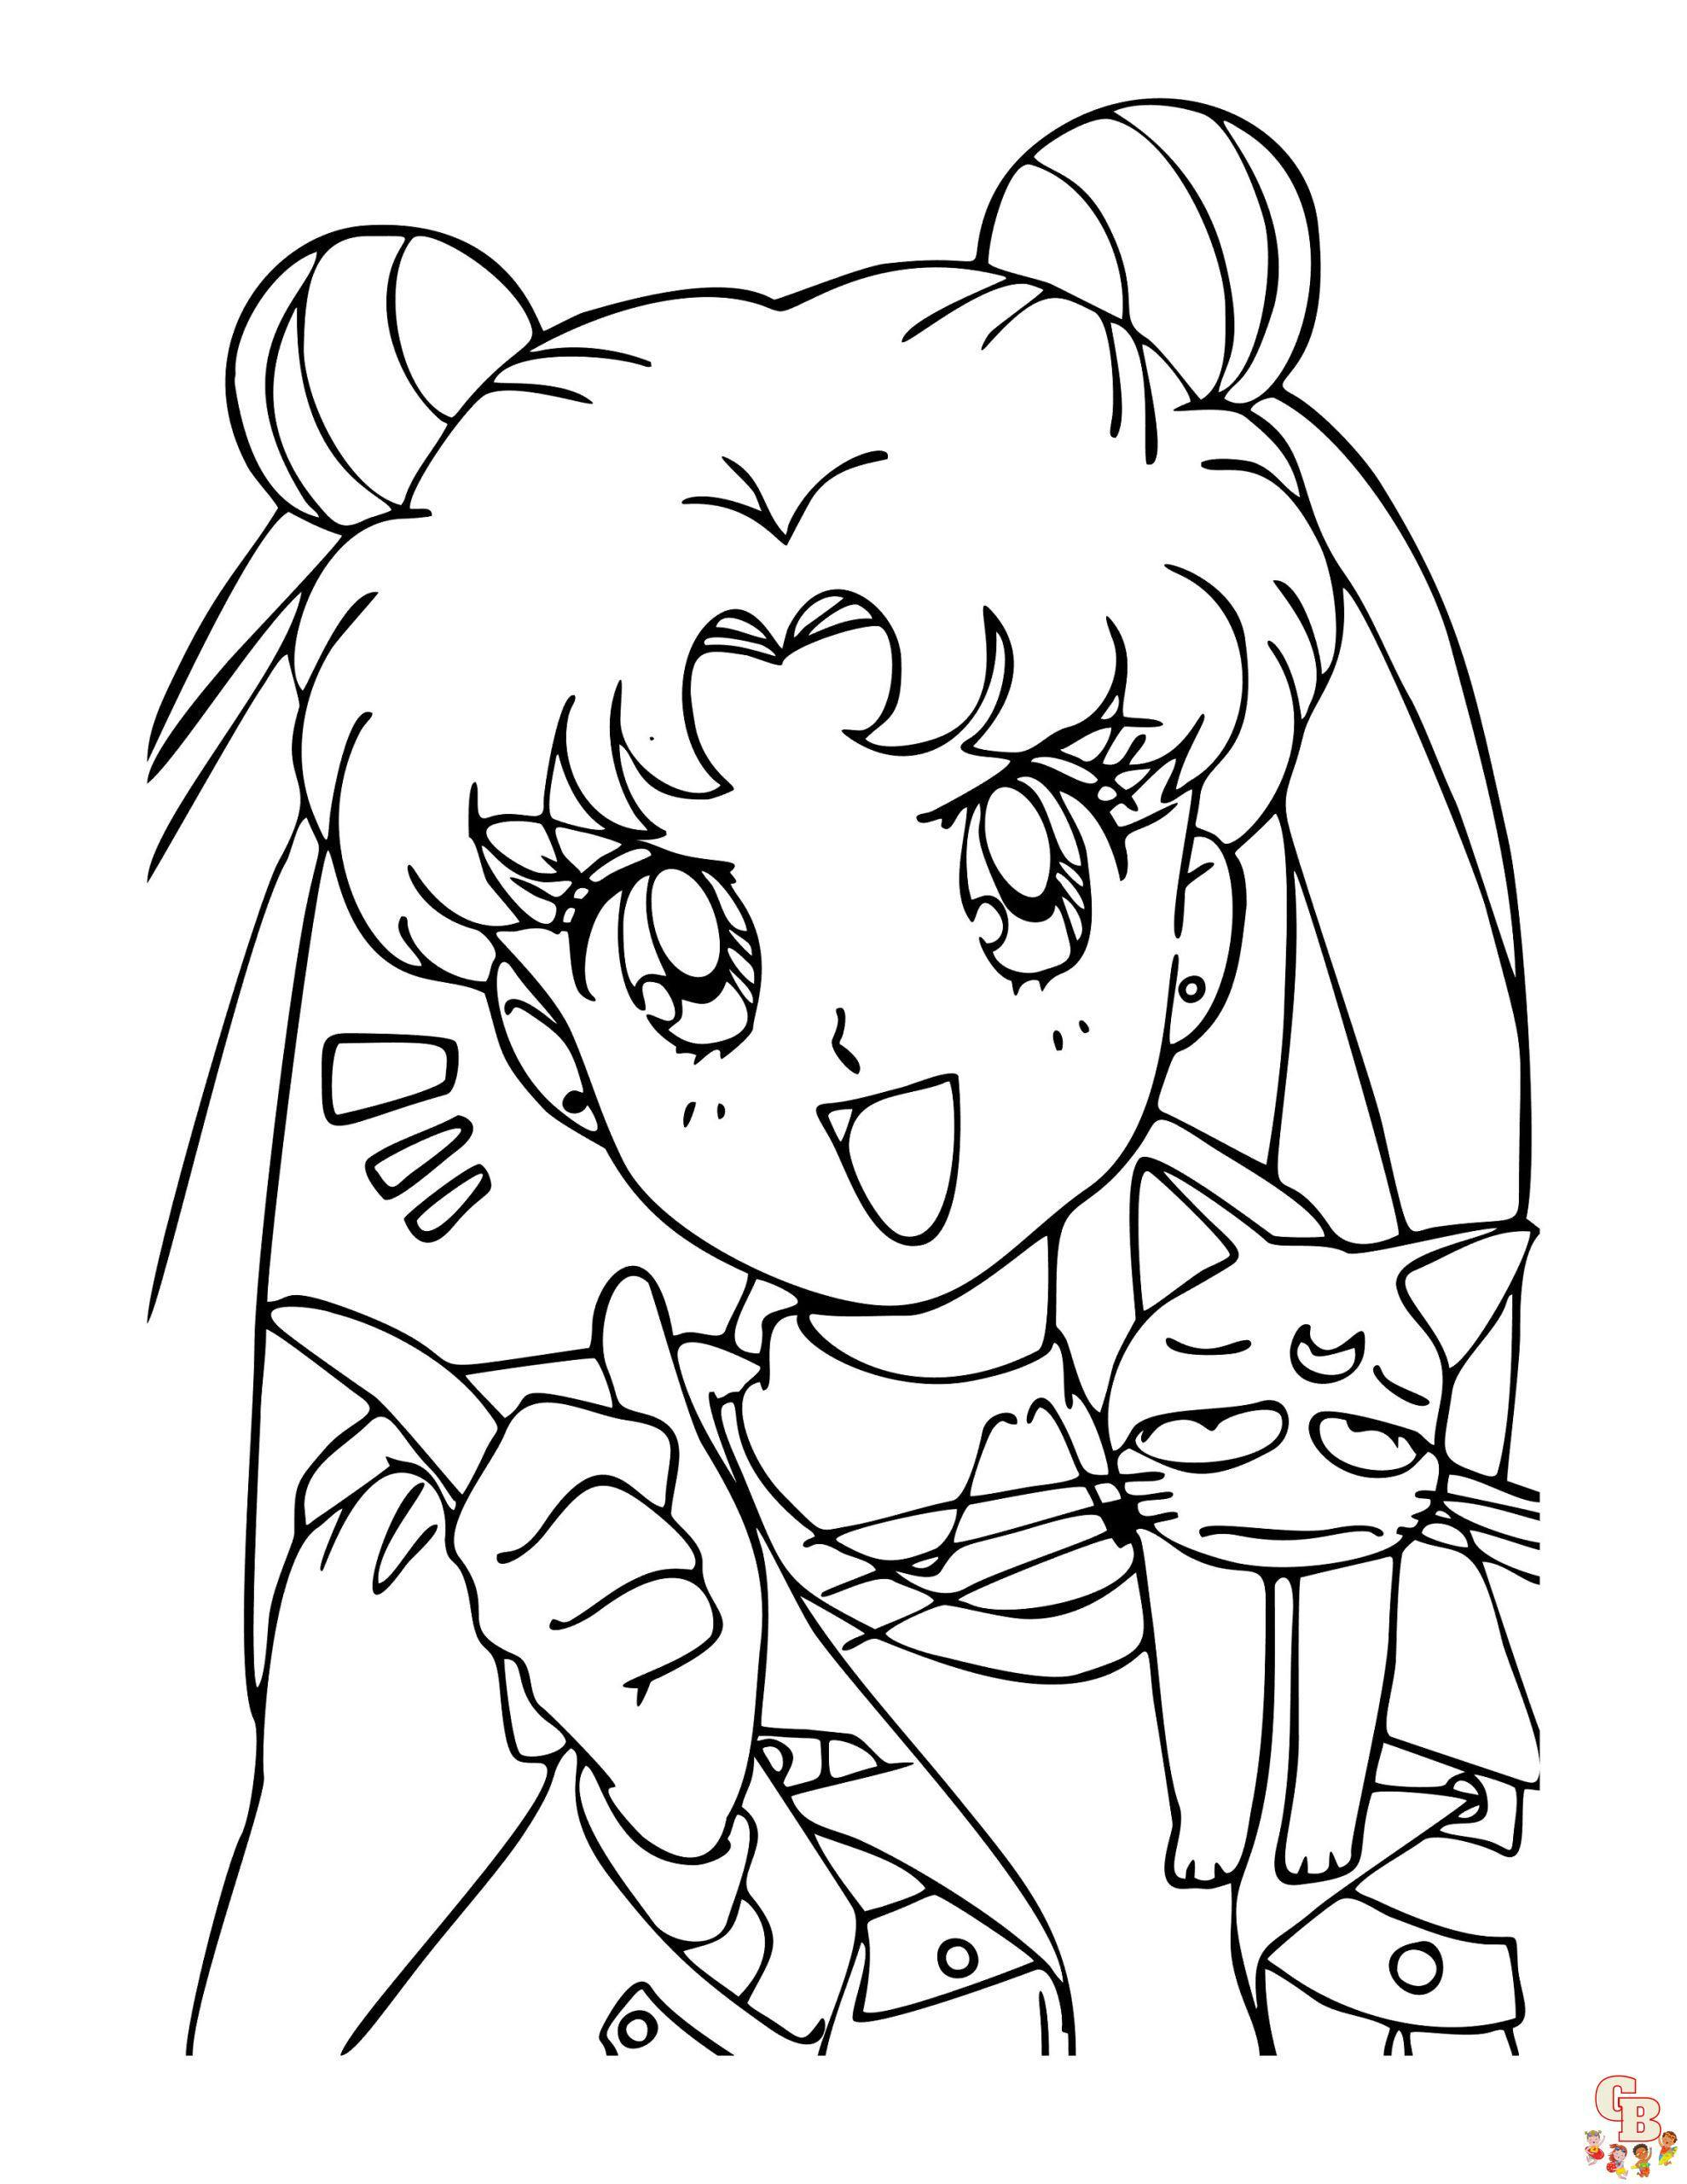 Anime Coloring Pages for Adults